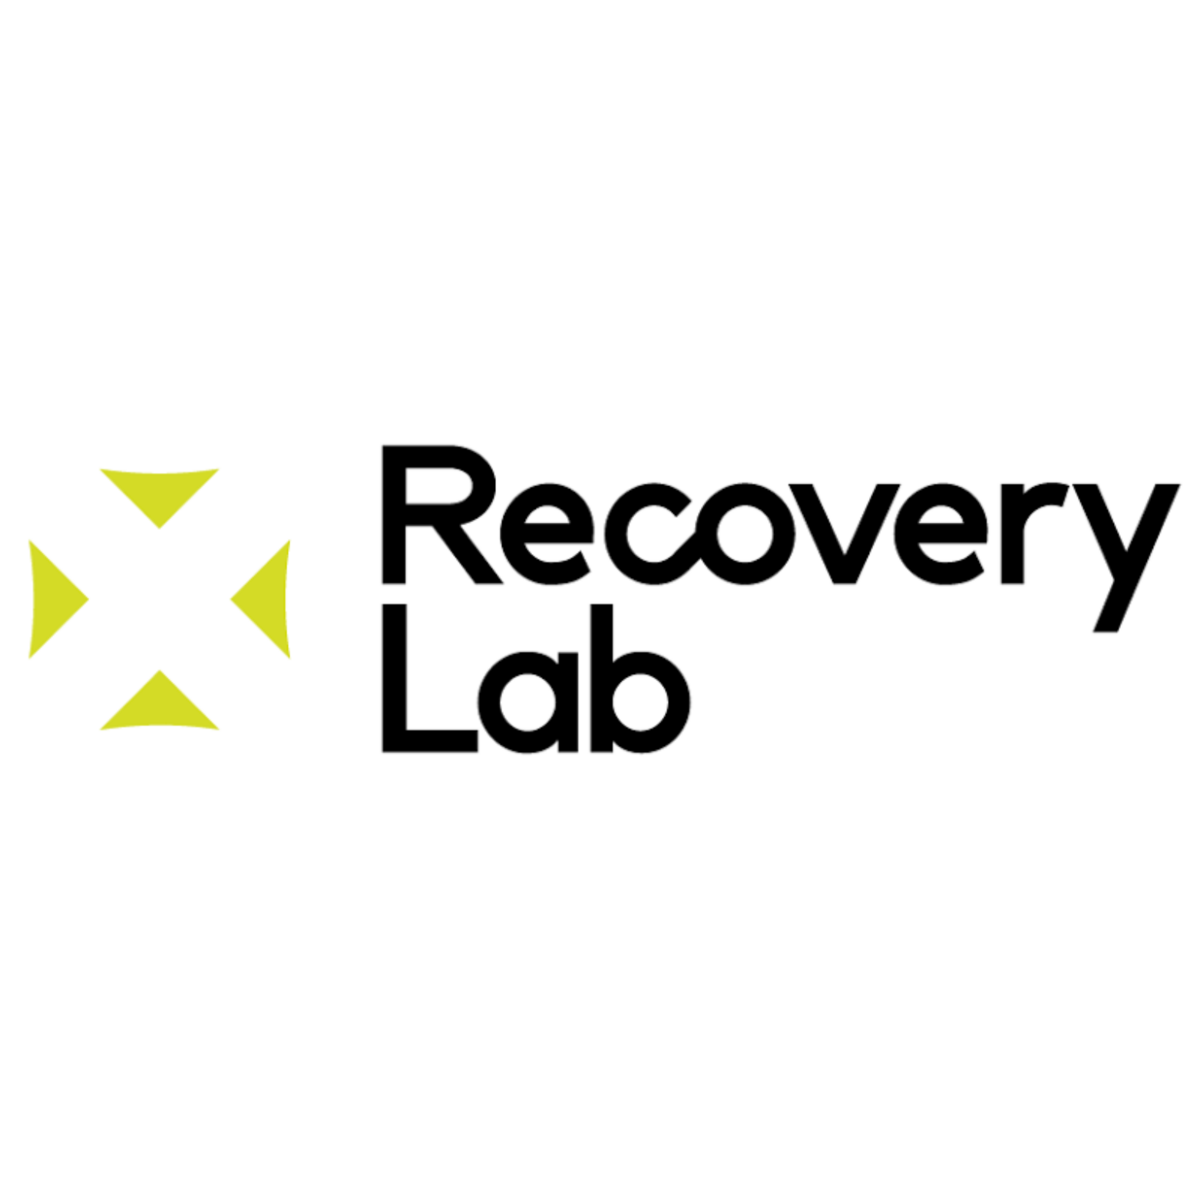 RECOVERY LAB